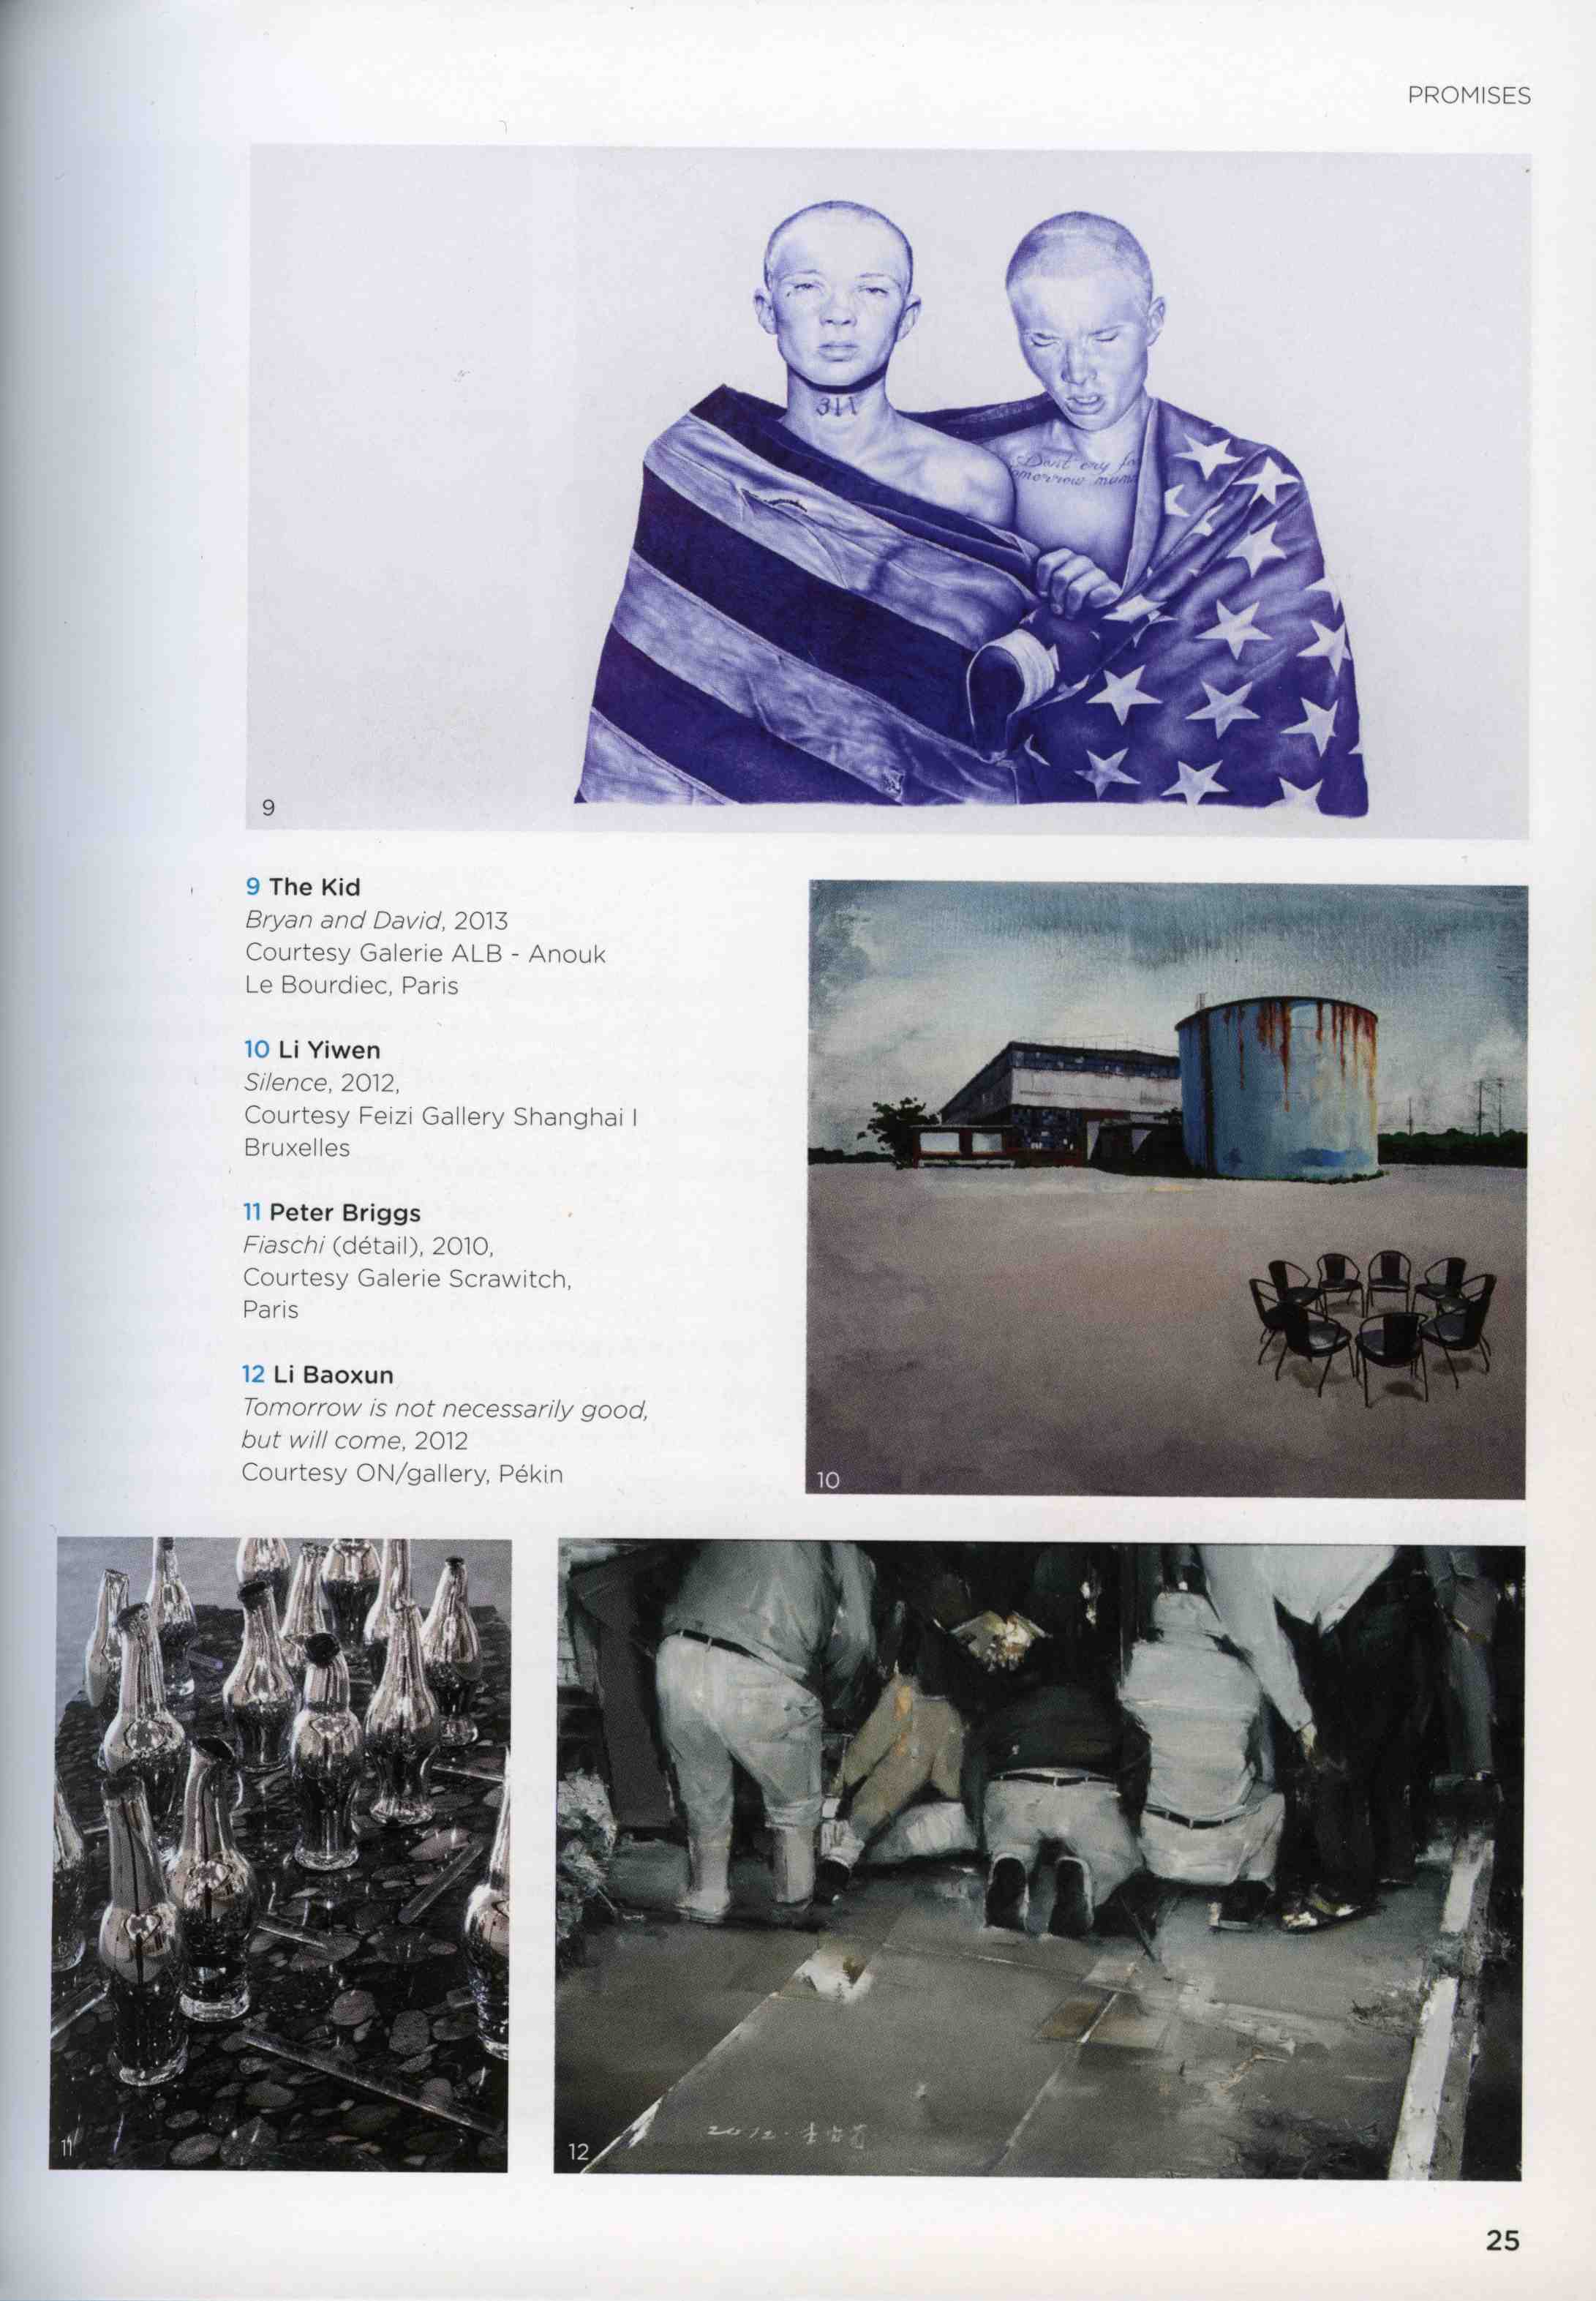 THE KID in ART PARIS 2014 Exhibition Catalogue Worldwide March 2014 page 25.jpg